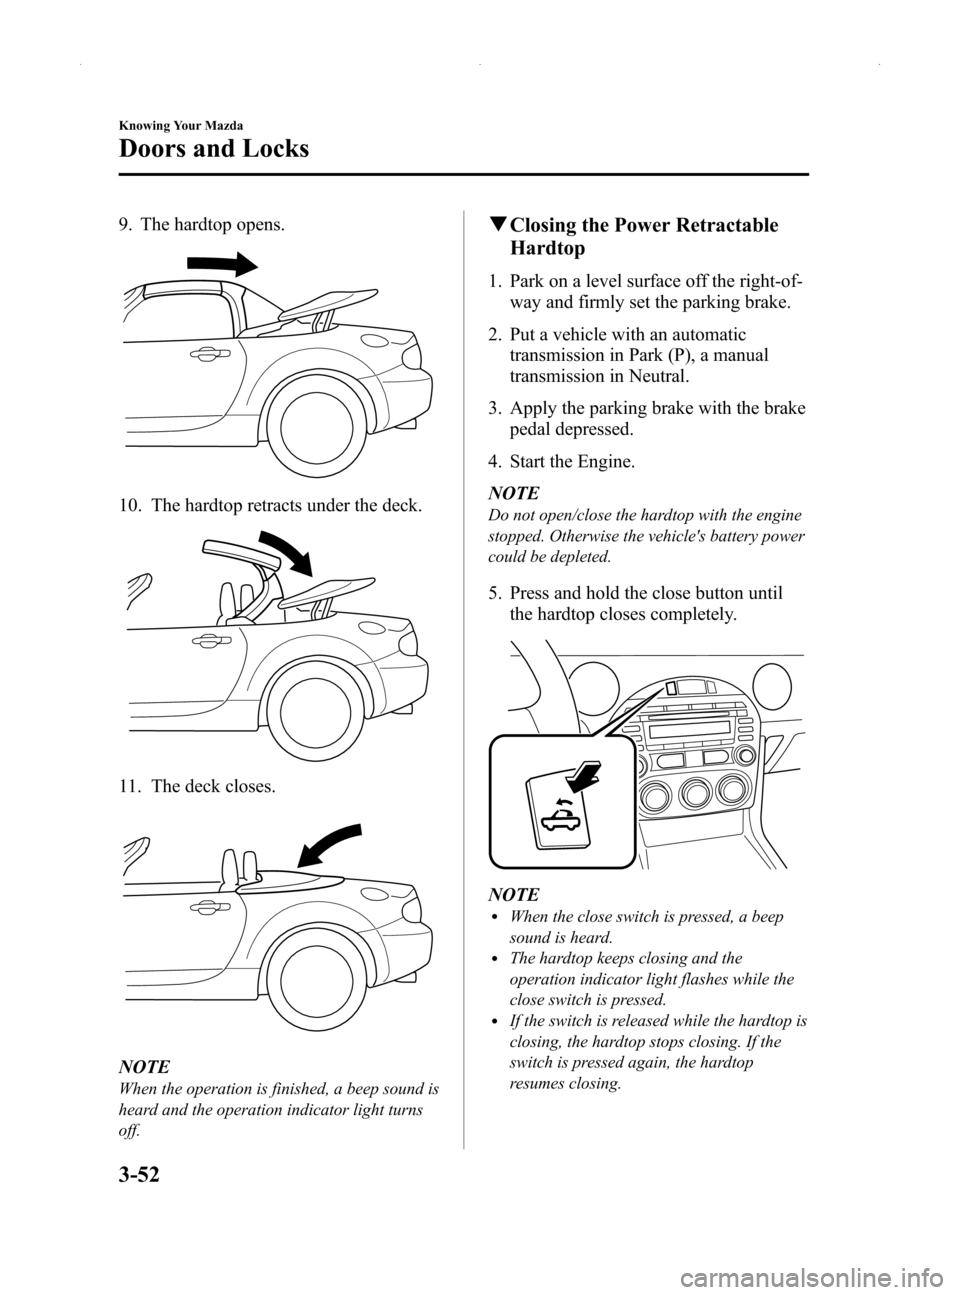 MAZDA MODEL MX-5 2014  Owners Manual (in English) Black plate (106,1)
9. The hardtop opens.
10. The hardtop retracts under the deck.
11. The deck closes.
NOTE
When the operation is finished, a beep sound is
heard and the operation indicator light tur